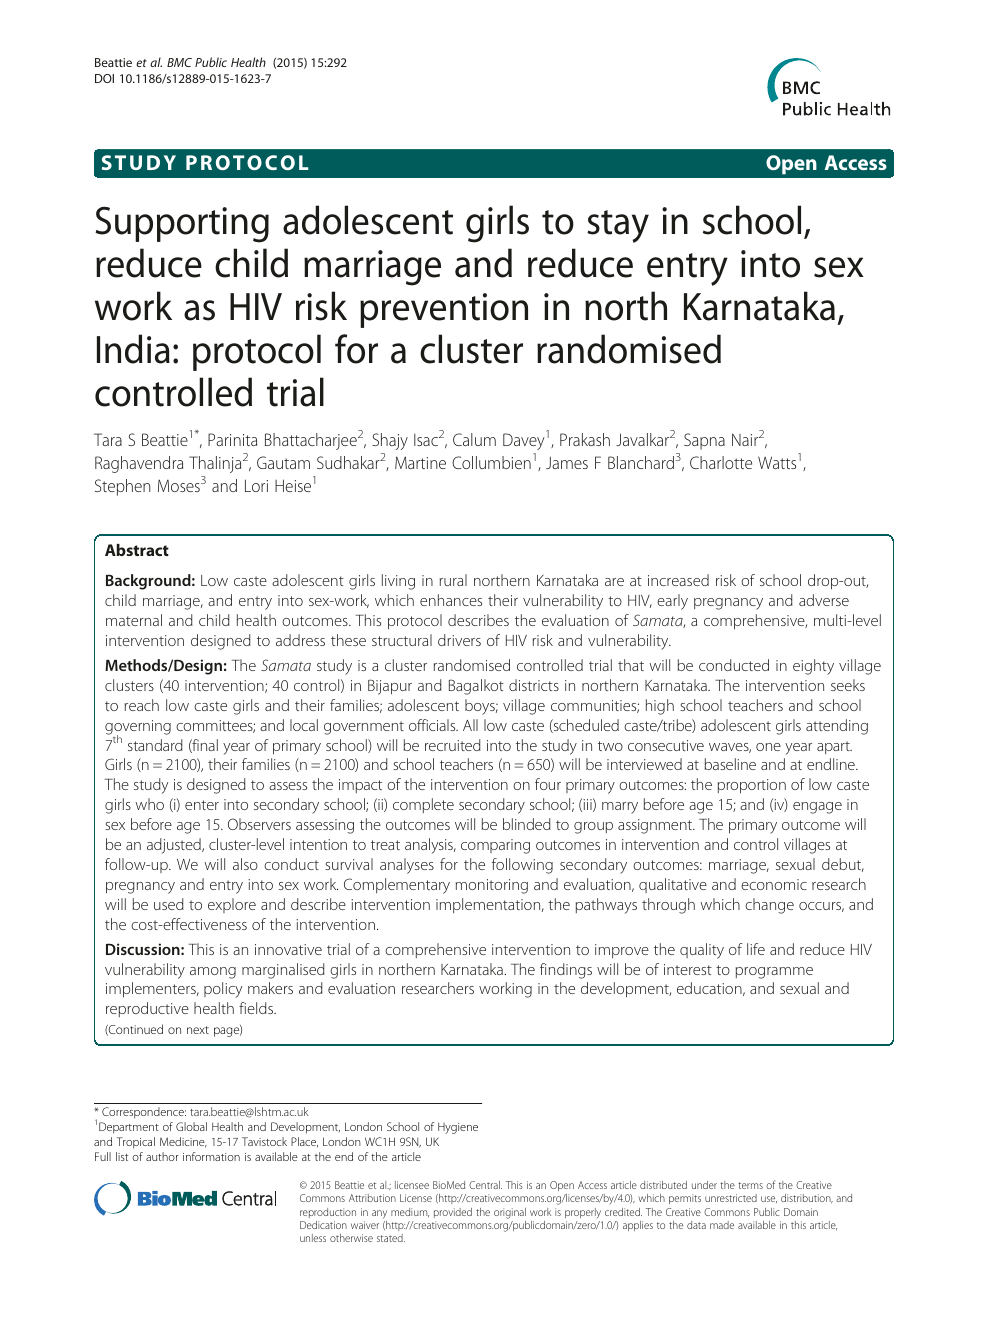 Supporting adolescent girls to stay in school, reduce child marriage and reduce entry into sex work as HIV risk prevention in north Karnataka, India protocol for a cluster randomised controlled trial – picture